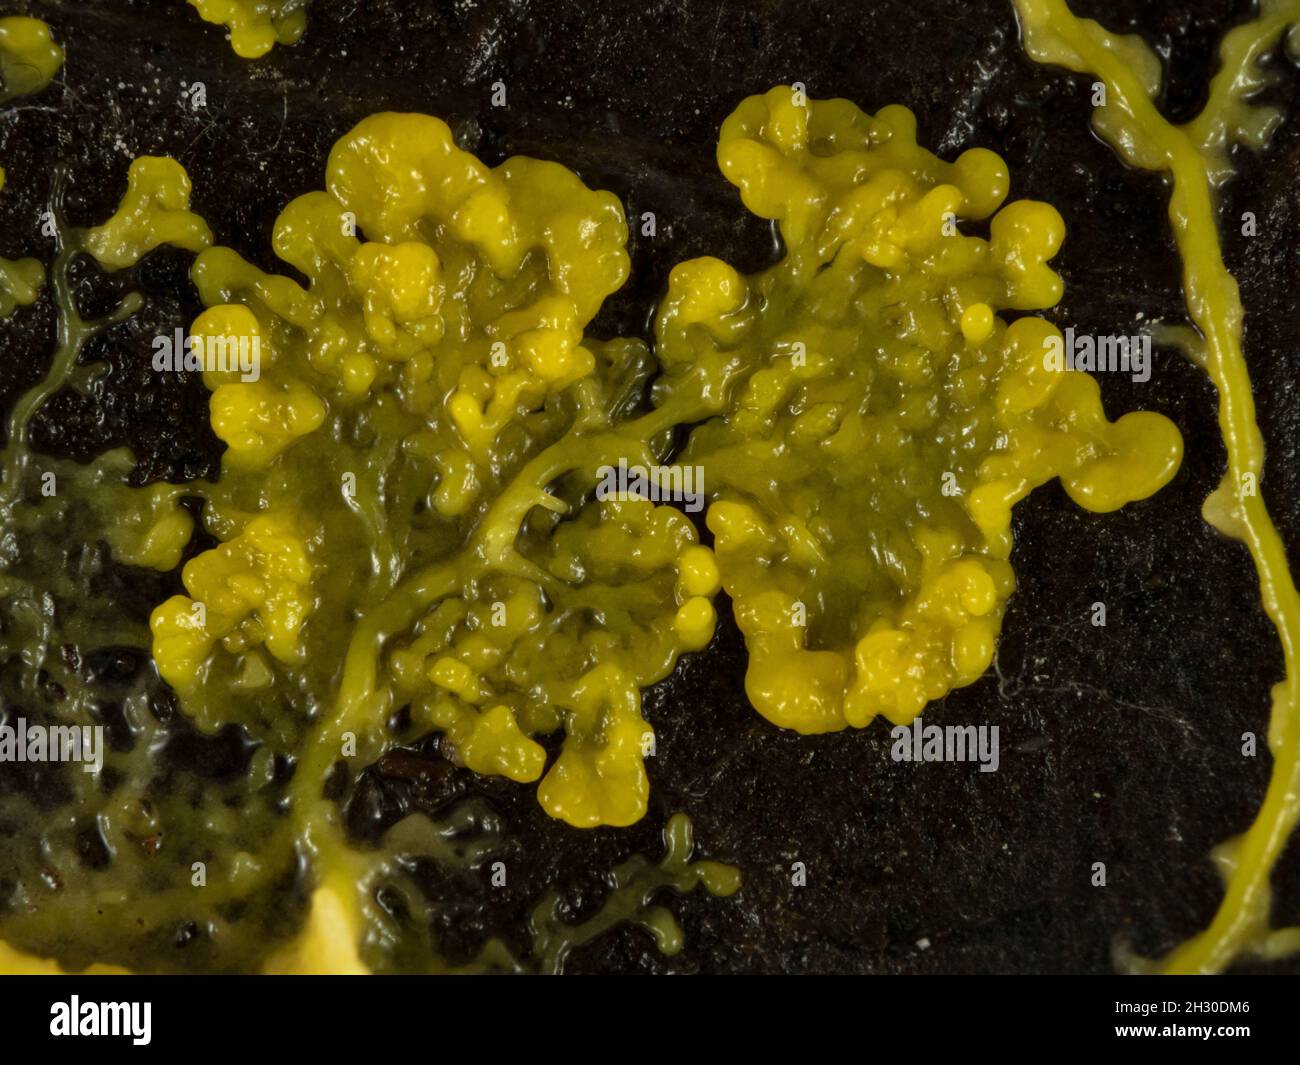 Close-up of the plasmodium of a yellow slime mould or slime mold (Physarum polycephalum) on a dead leaf as it spreads out in search of food Stock Photo